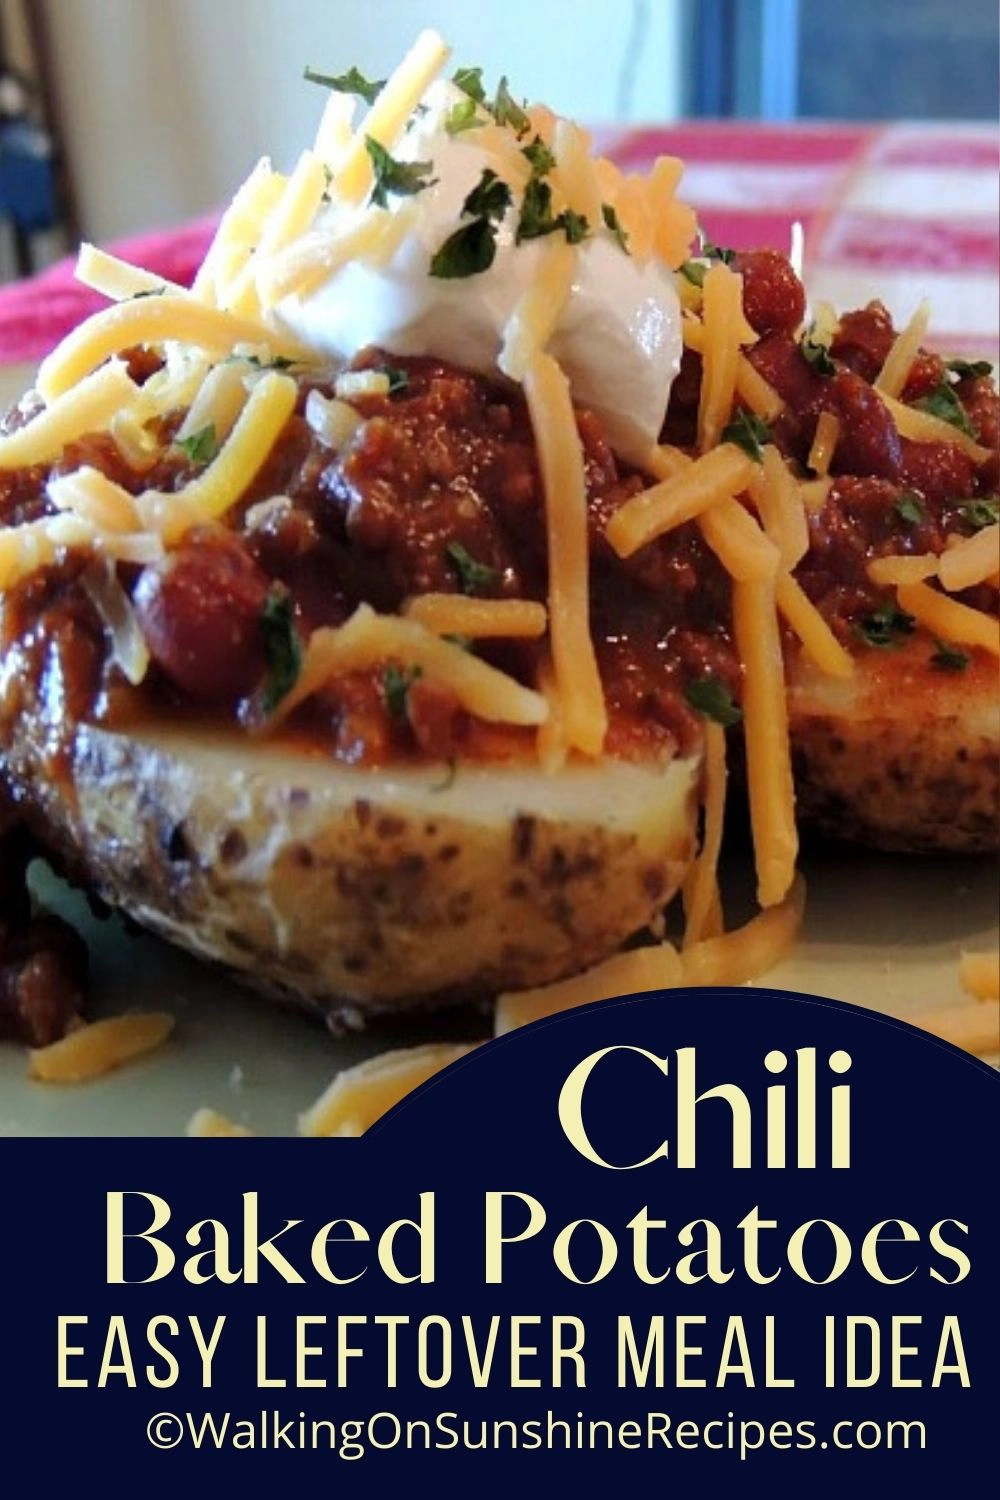 baked potatoes with leftover chili, salsa, cheese and sour cream. 